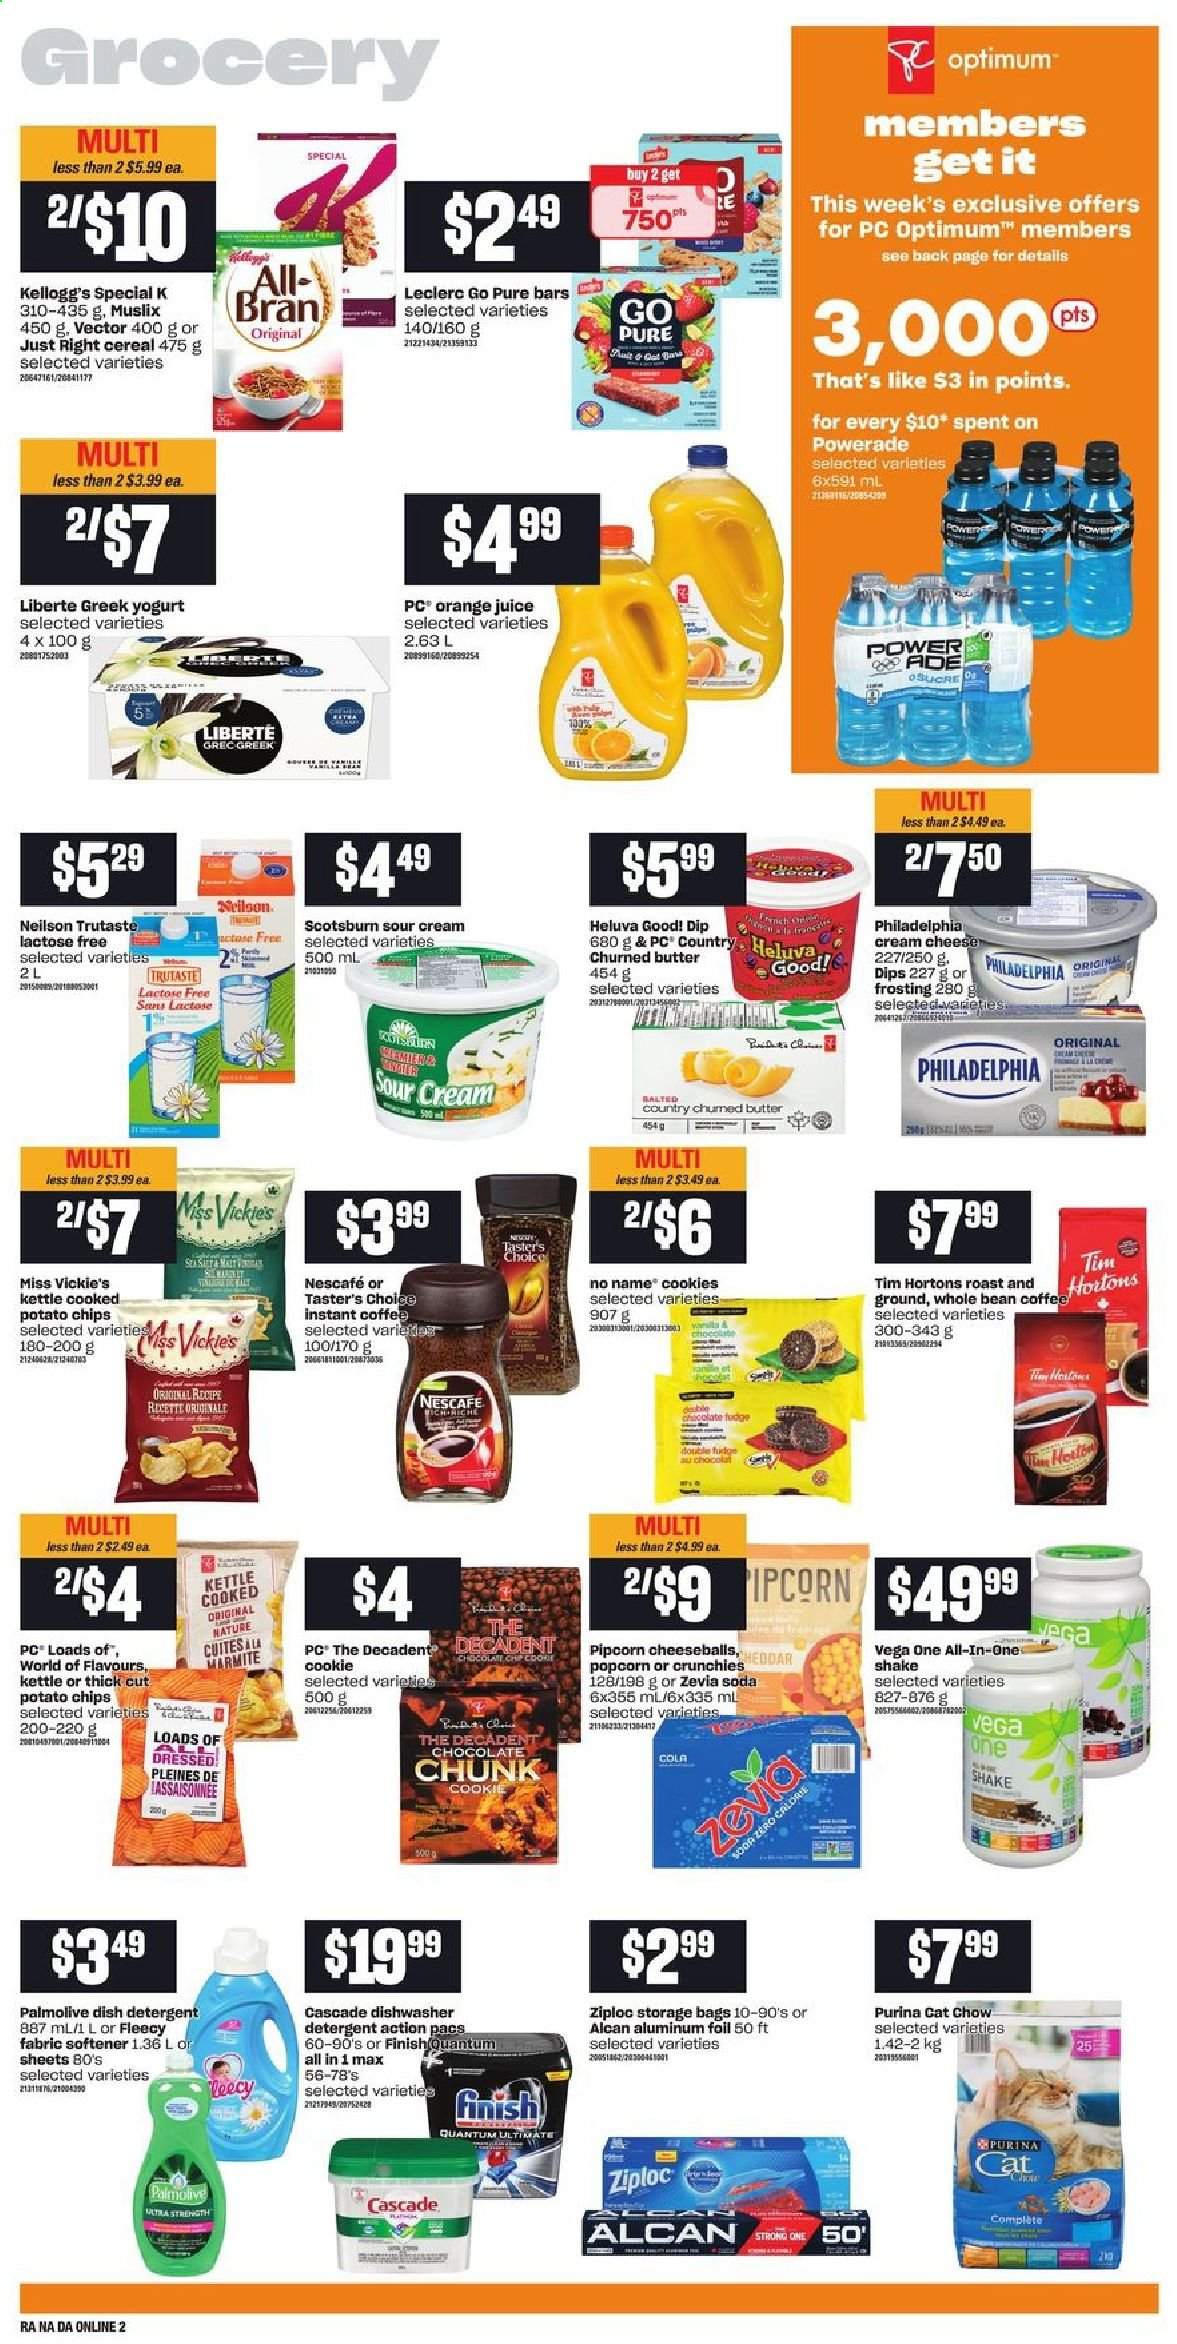 Atlantic Superstore flyer  - May 20, 2021 - May 26, 2021. Page 6.